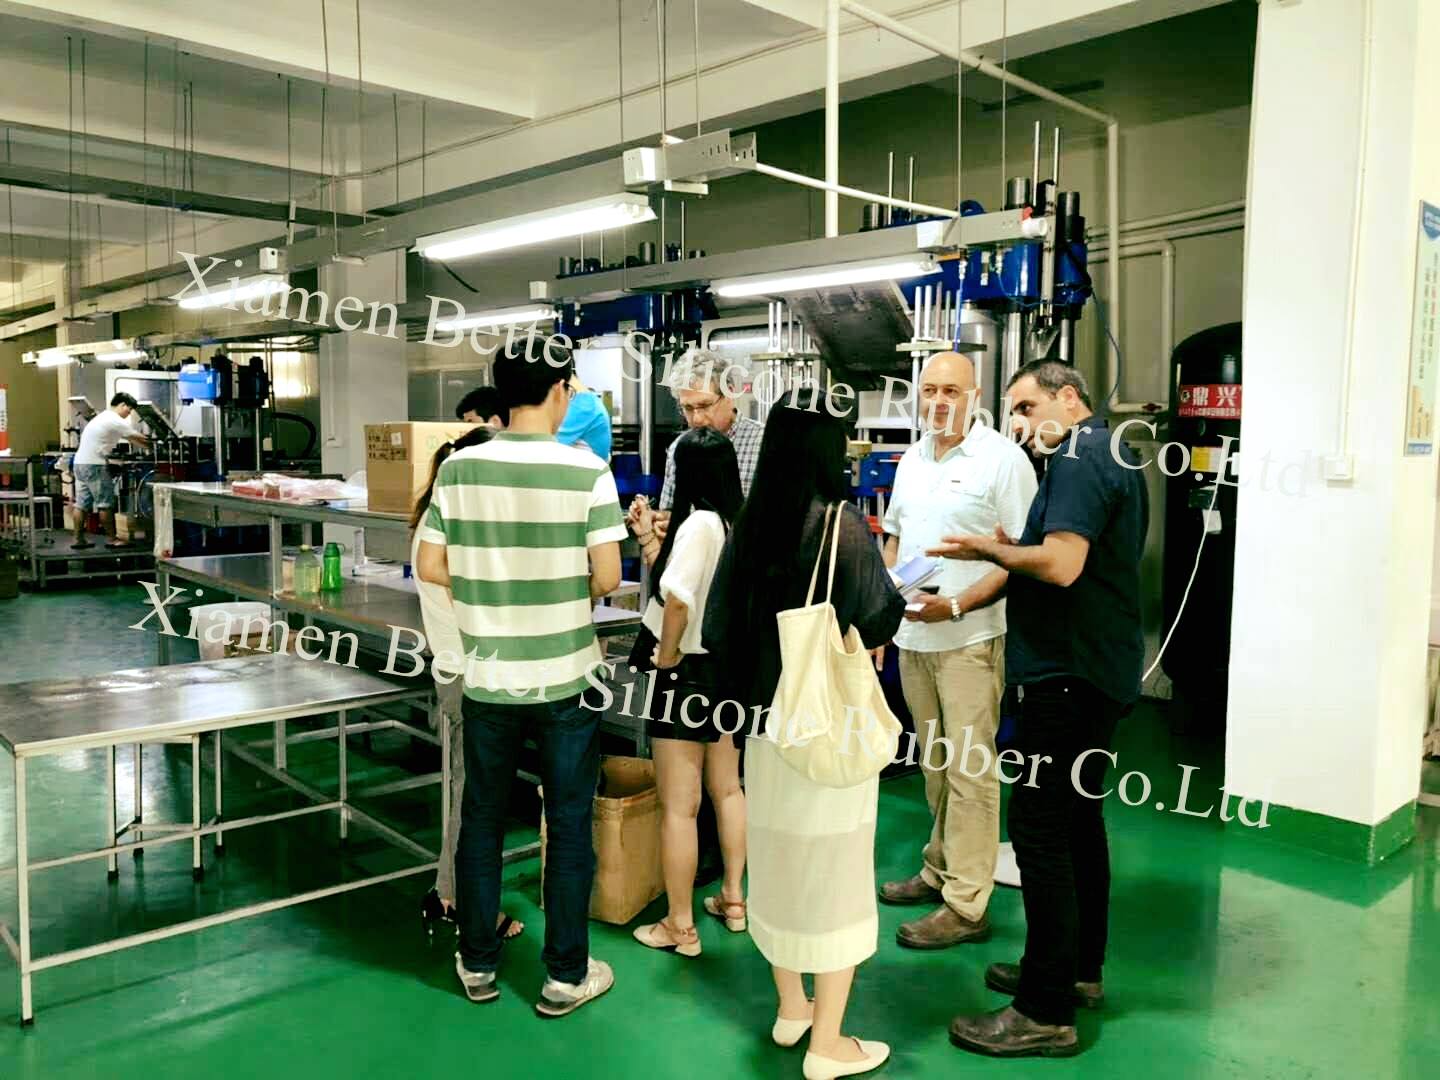 Our Israeli customer came to our silicone rubber factory for the second time to inspect